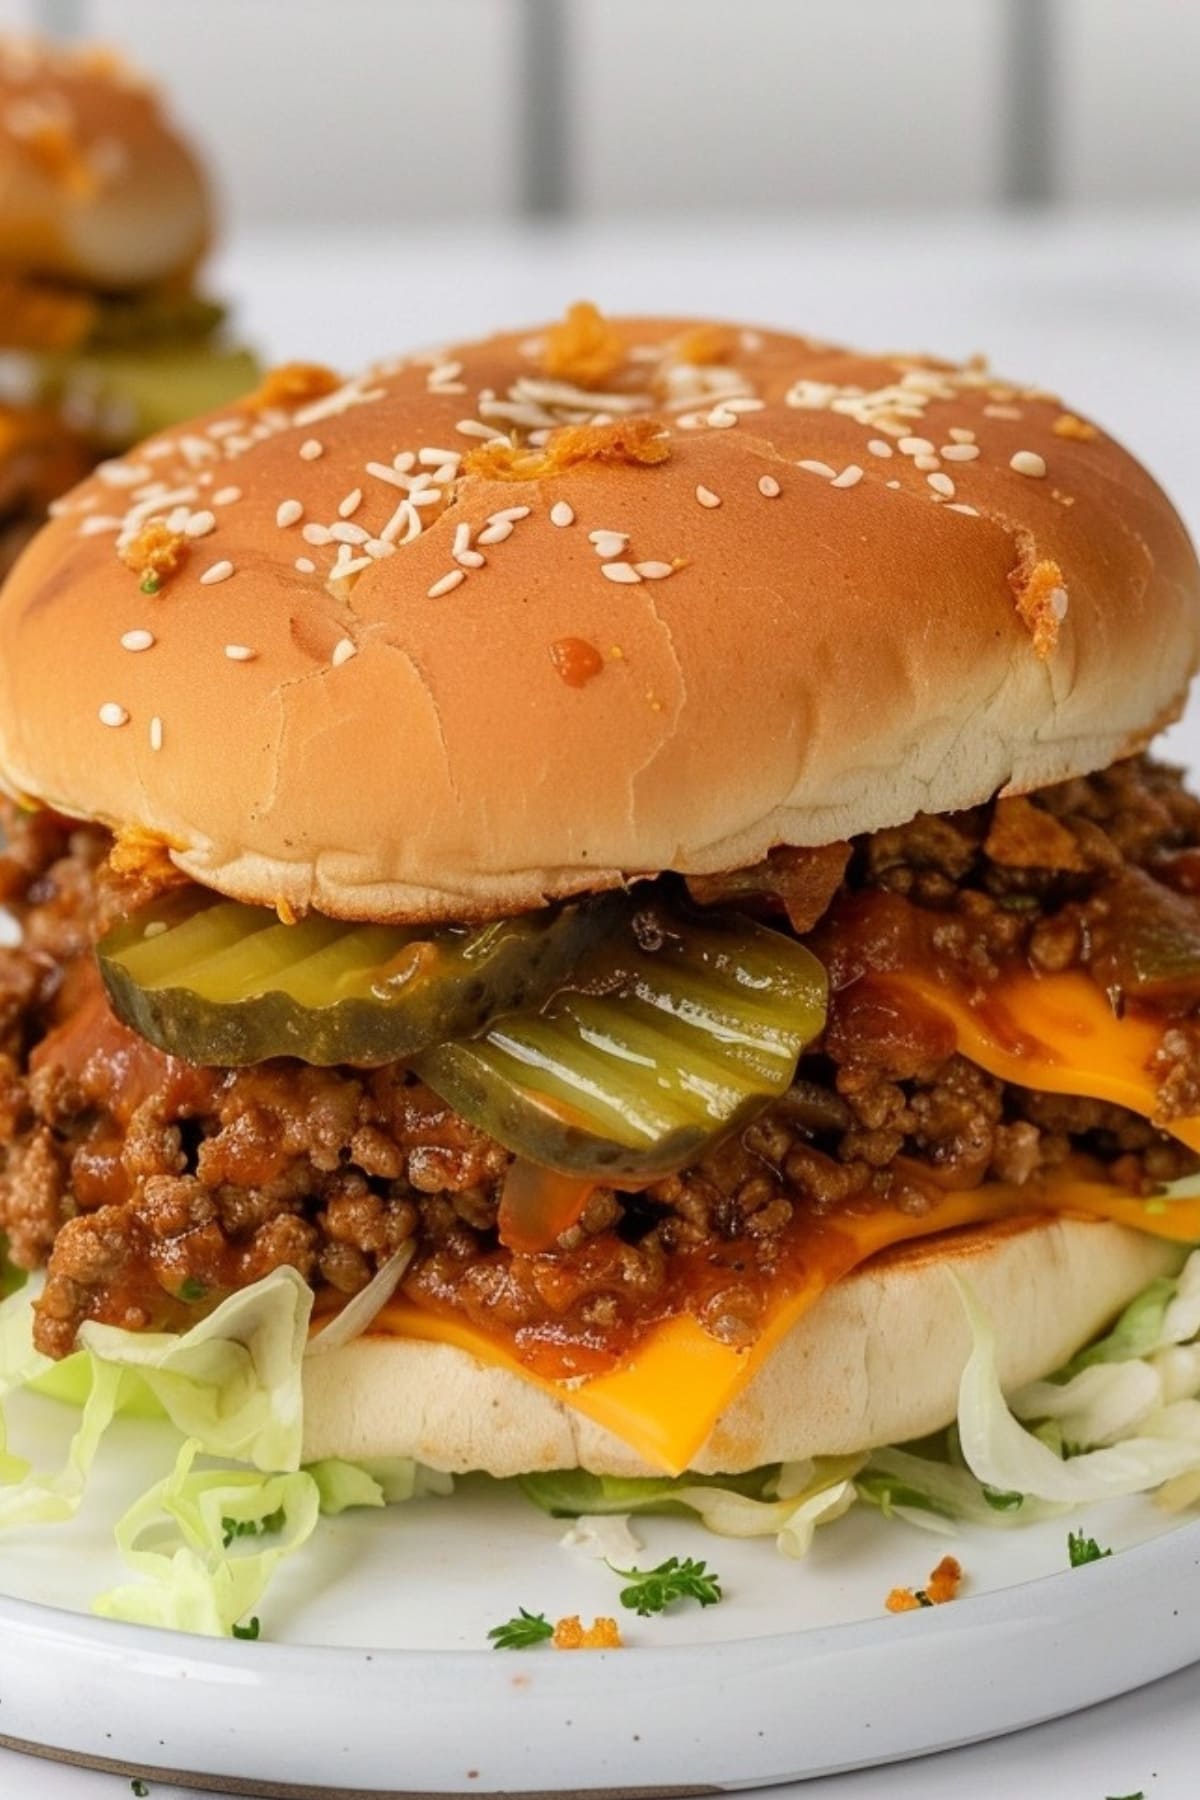 Closeup of Big Mac Sloppy Joe in a plate made with ground beef, dill pickles, cheese and lettuce.